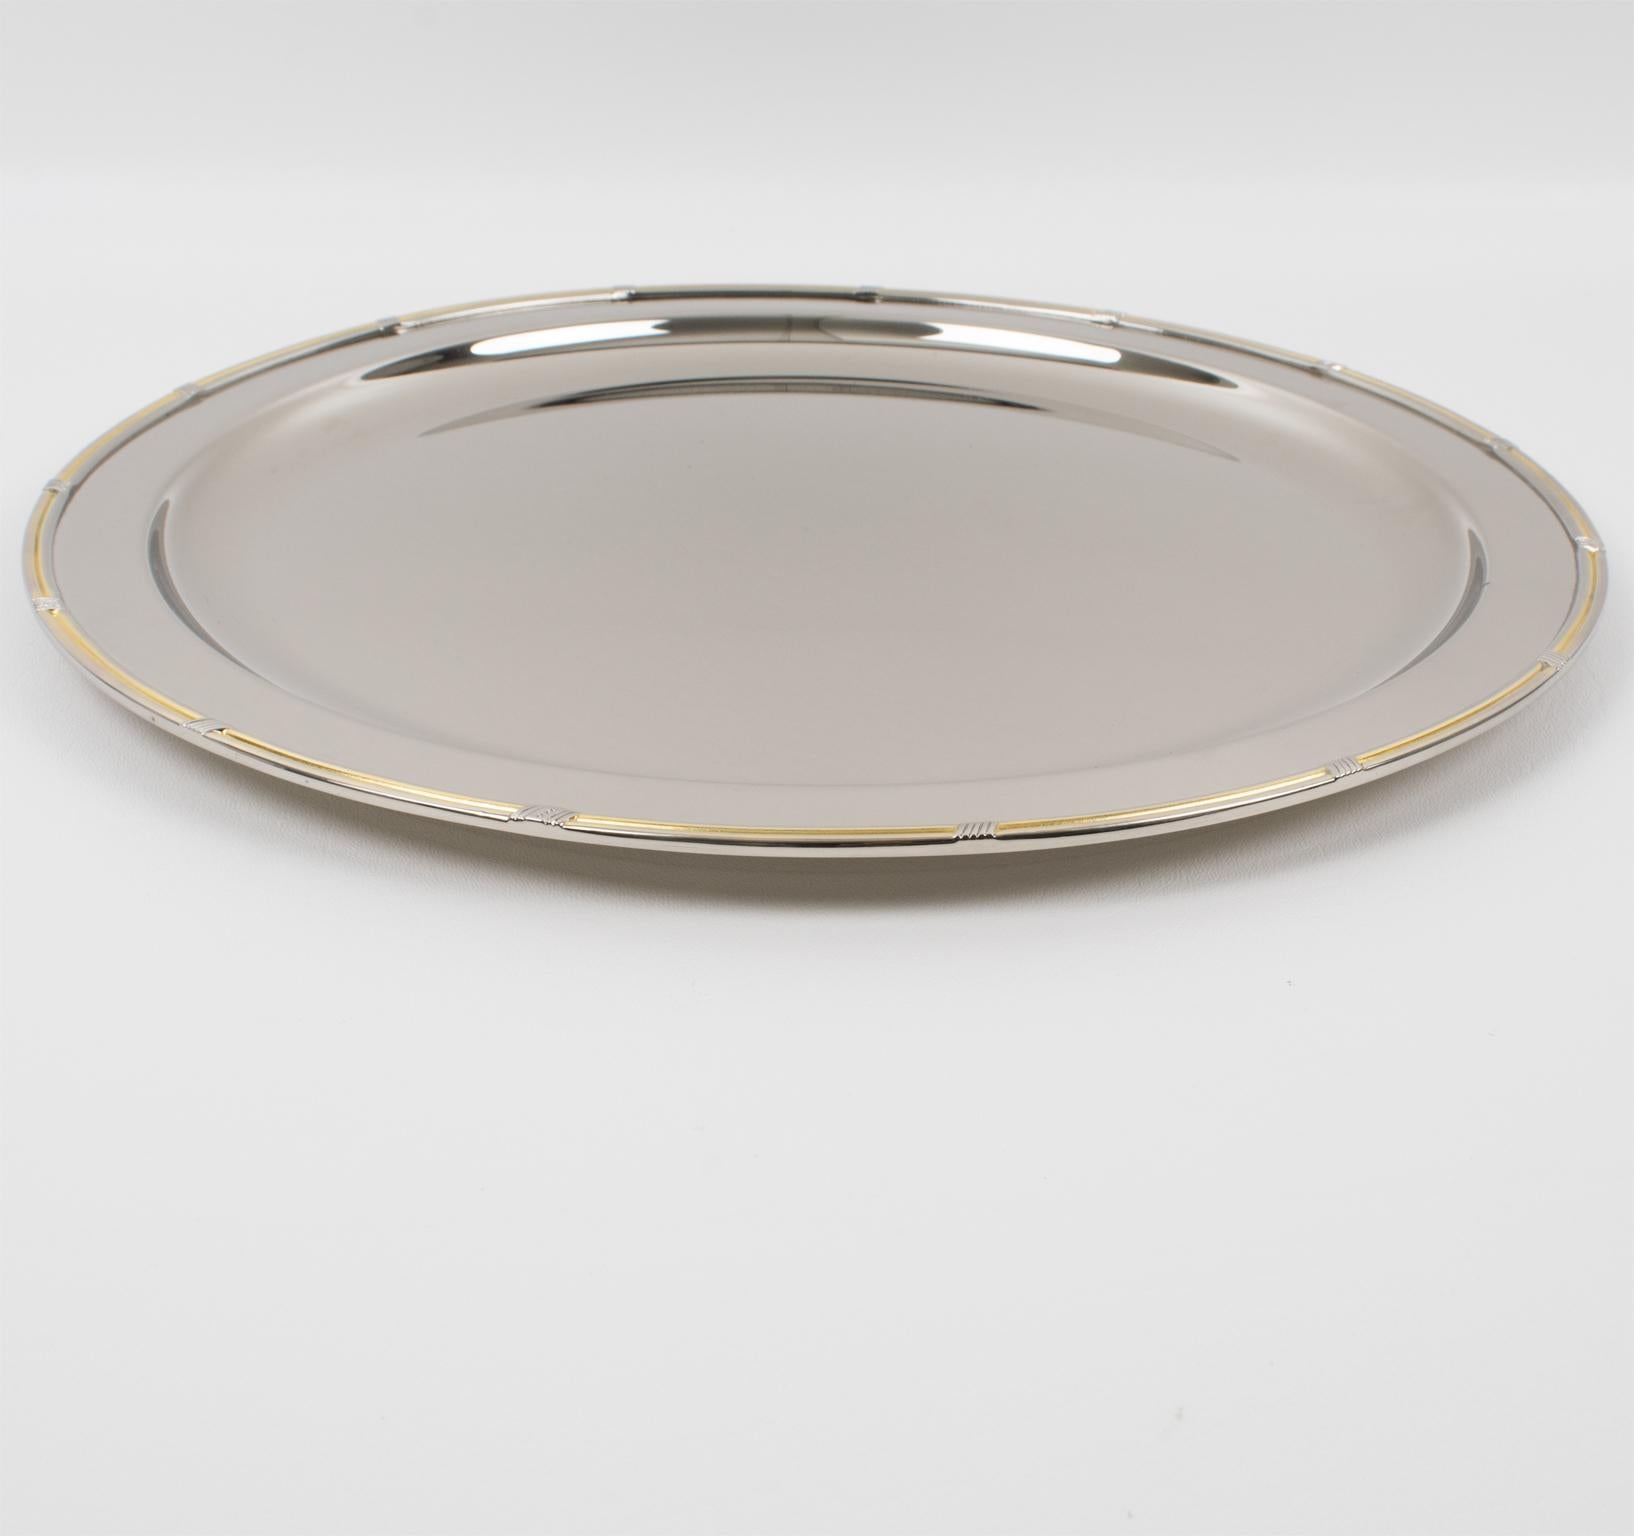 Gucci, Italy, crafted this luxury silver-plated metal barware serving tray in the 1980s. This bar accessory has a sleek and modernist design. It has a rounded shape with a raised edge and is made from a silver plate metal with an all-around carved